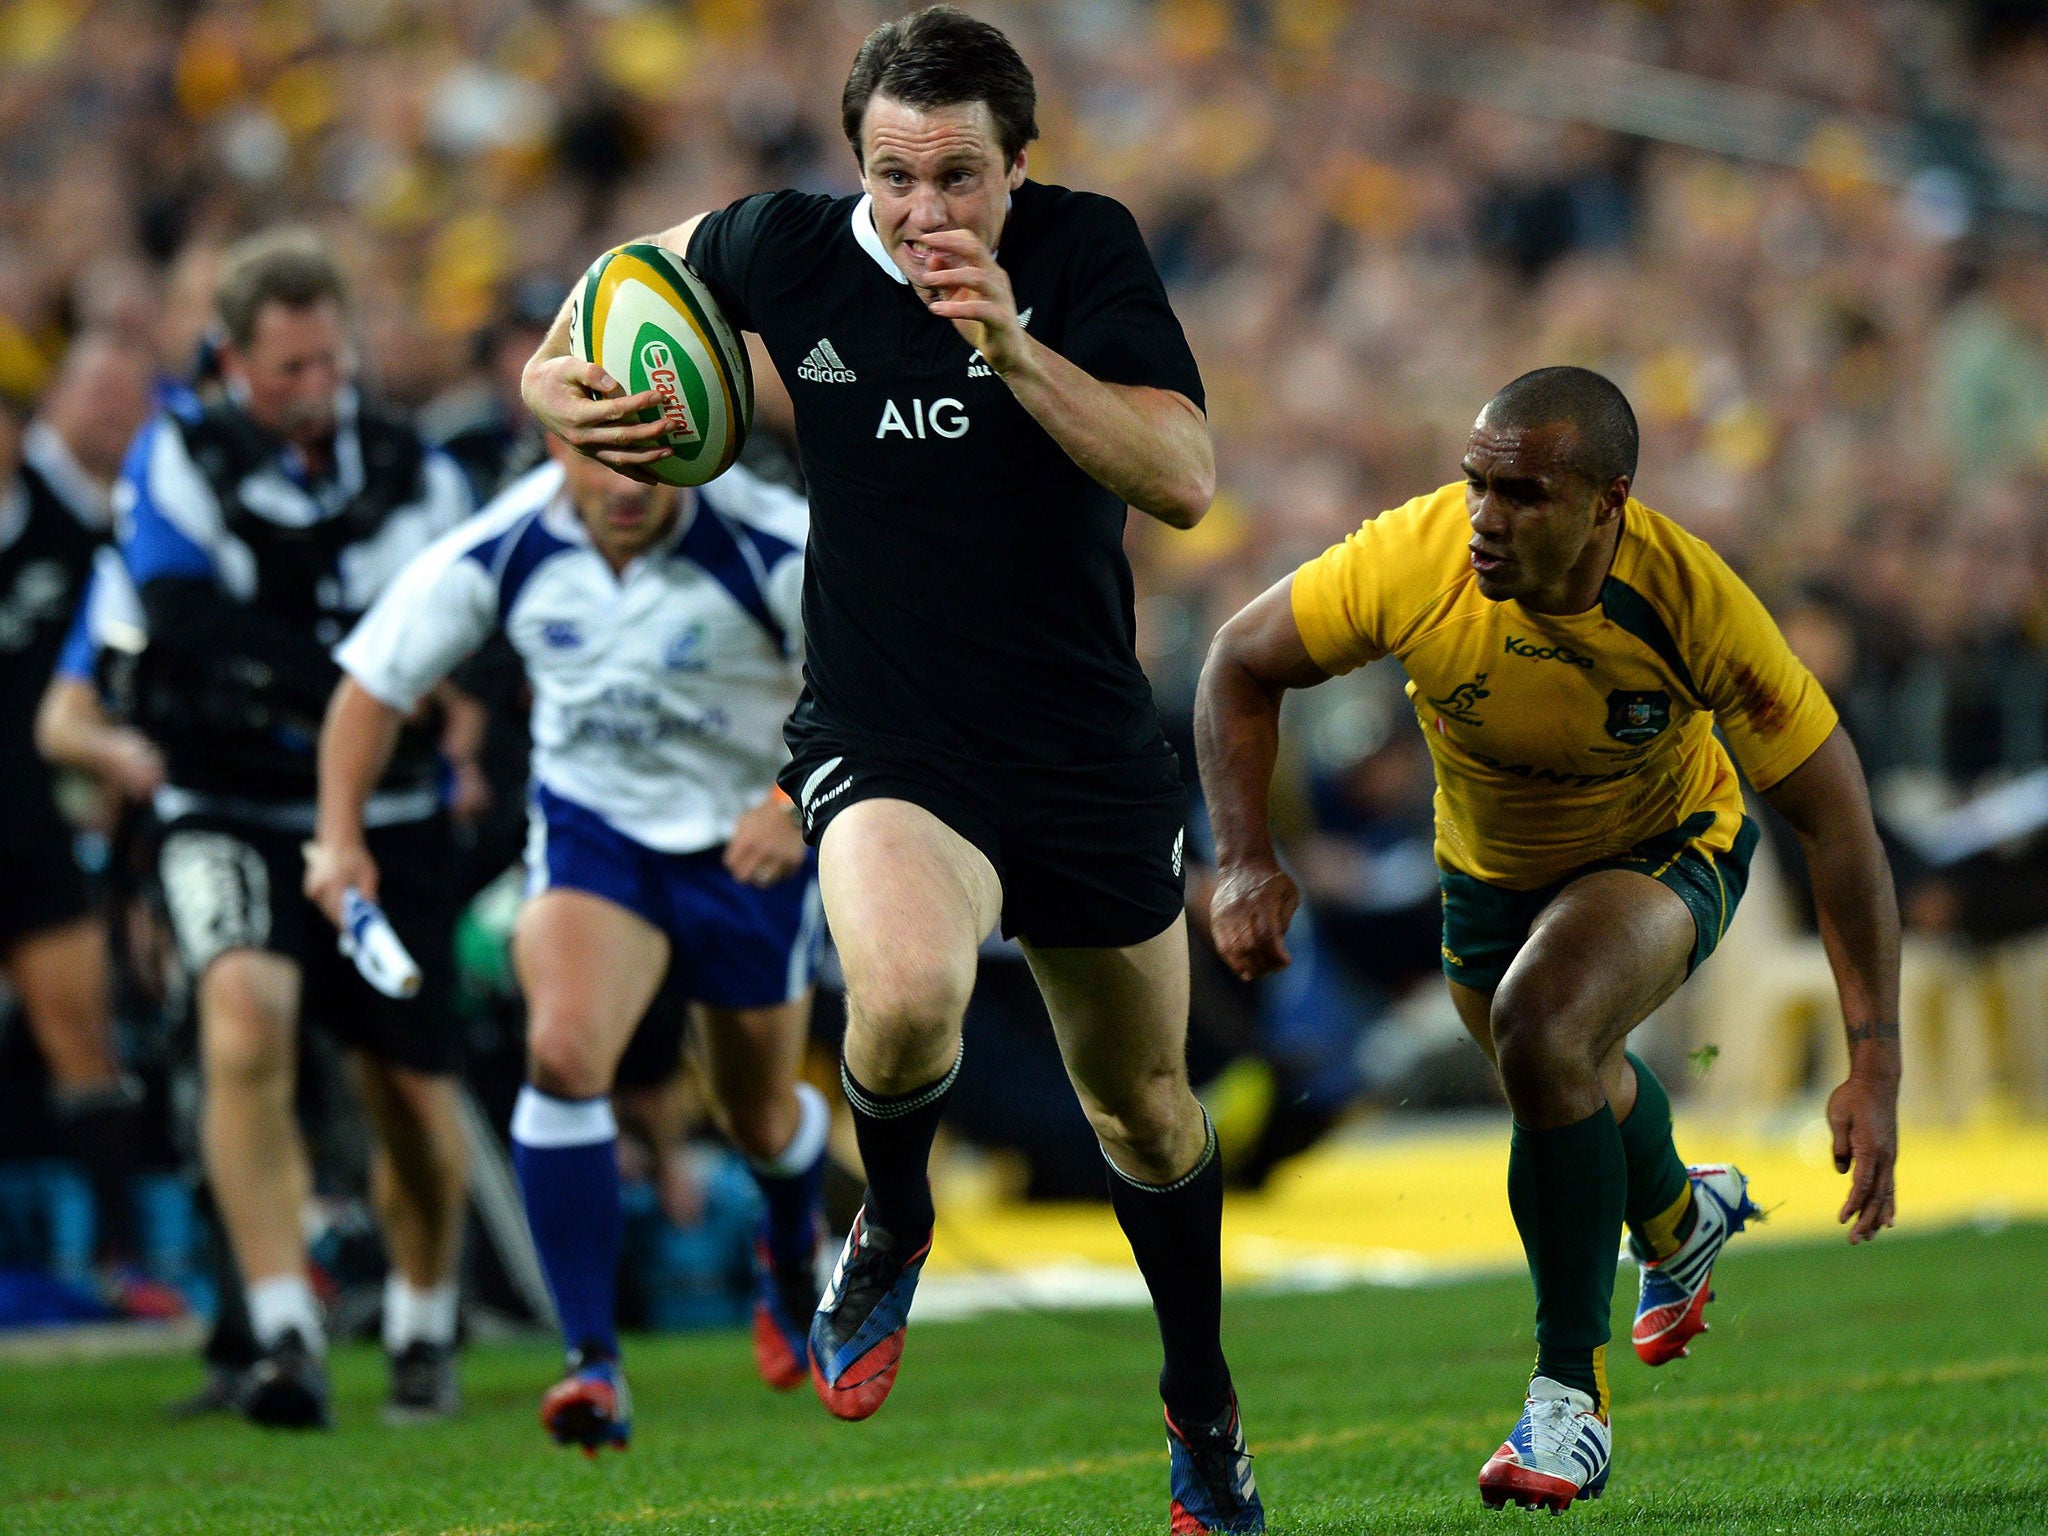 Quick step: Ben Smith evades Australia’s Will Genia before running in one his three tries for New Zealand in their 47-29 win in Sydney